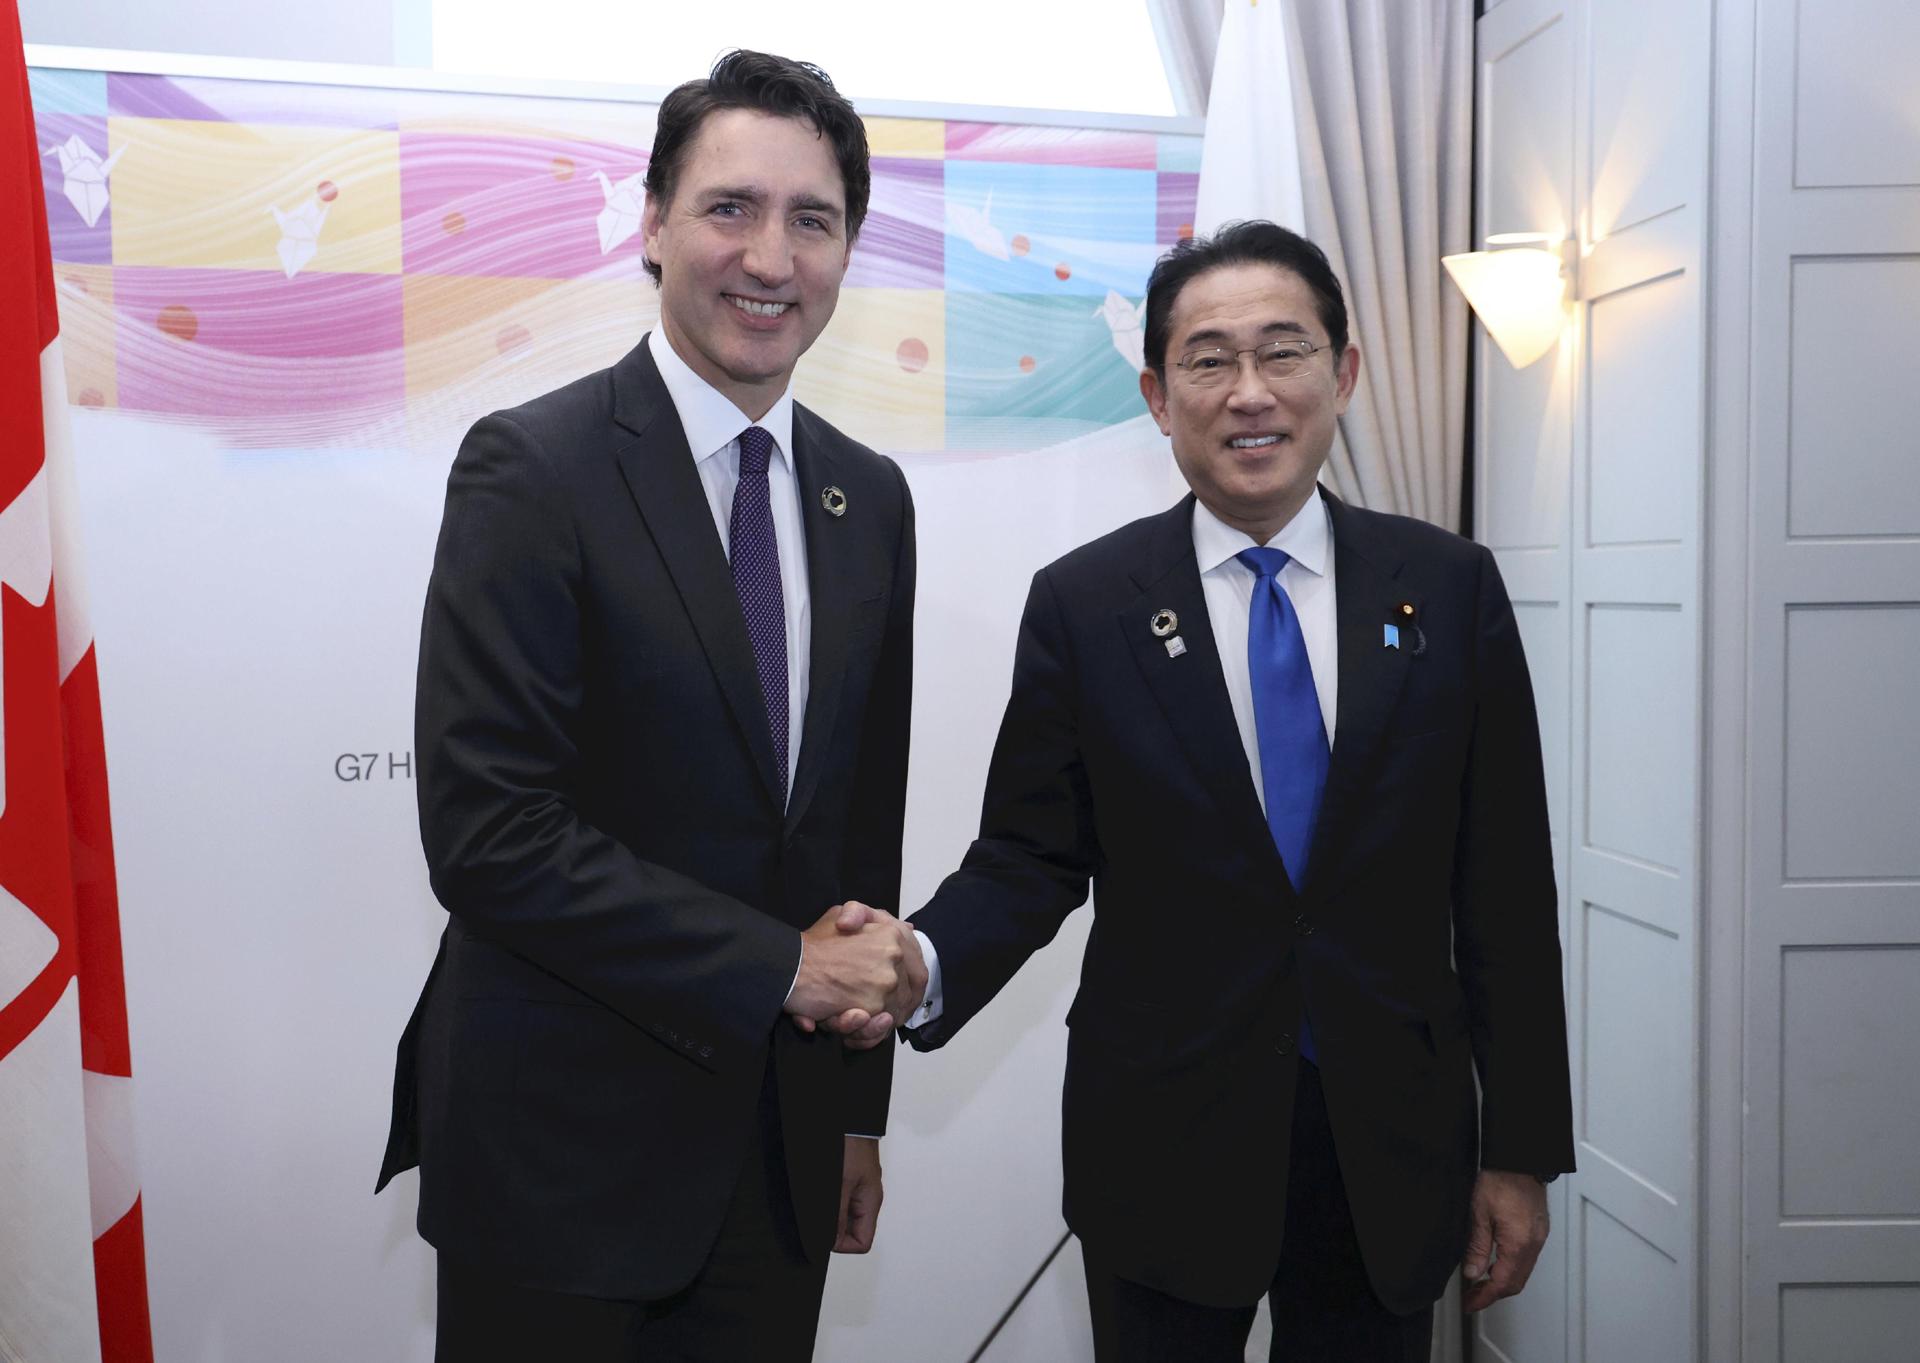 Canadian Prime Minister Justin Trudeau (L) and Japanese Prime Minister Fumio Kishida pose for photographers before their bilateral meeting at the G7 Summit, in Hiroshima, Japan, 19 May 2023. EFE-EPA/POOL JAPAN OUT EDITORIAL USE ONLY/NO SALES
